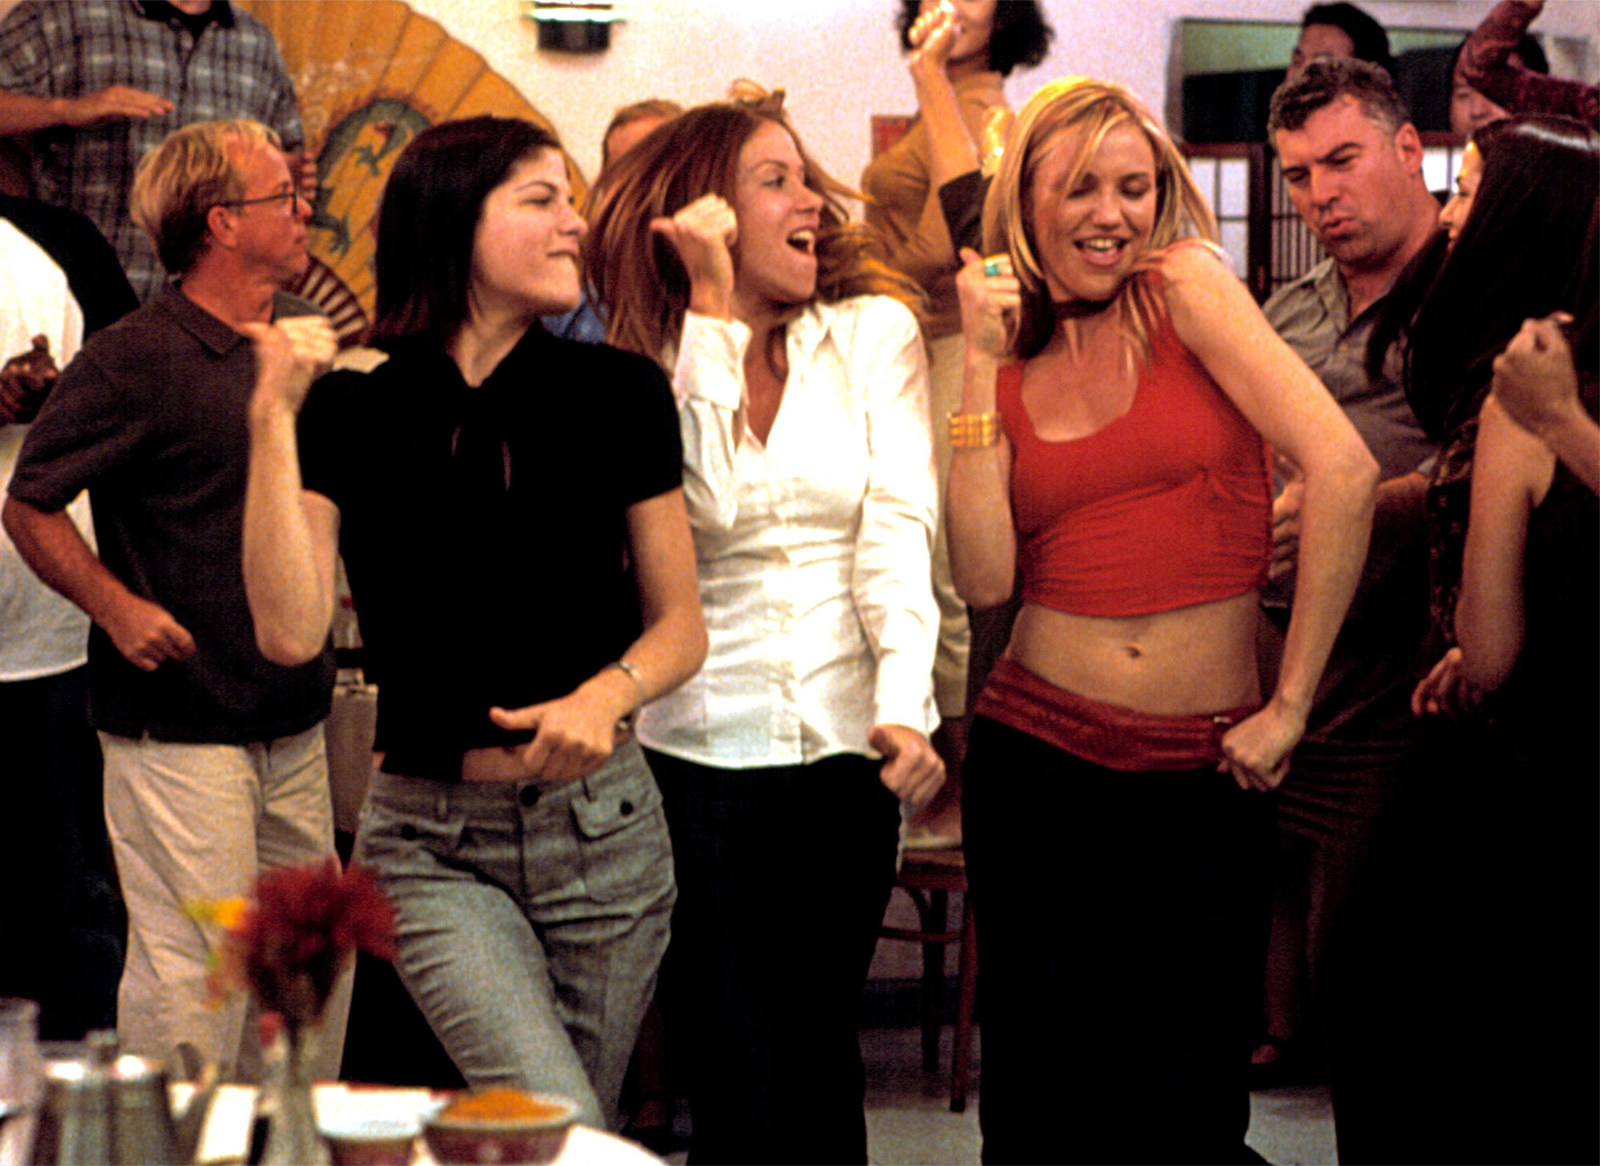 Selma Blair, Christina Applegate, and Cameron Diaz from Sweetest Thing dancing